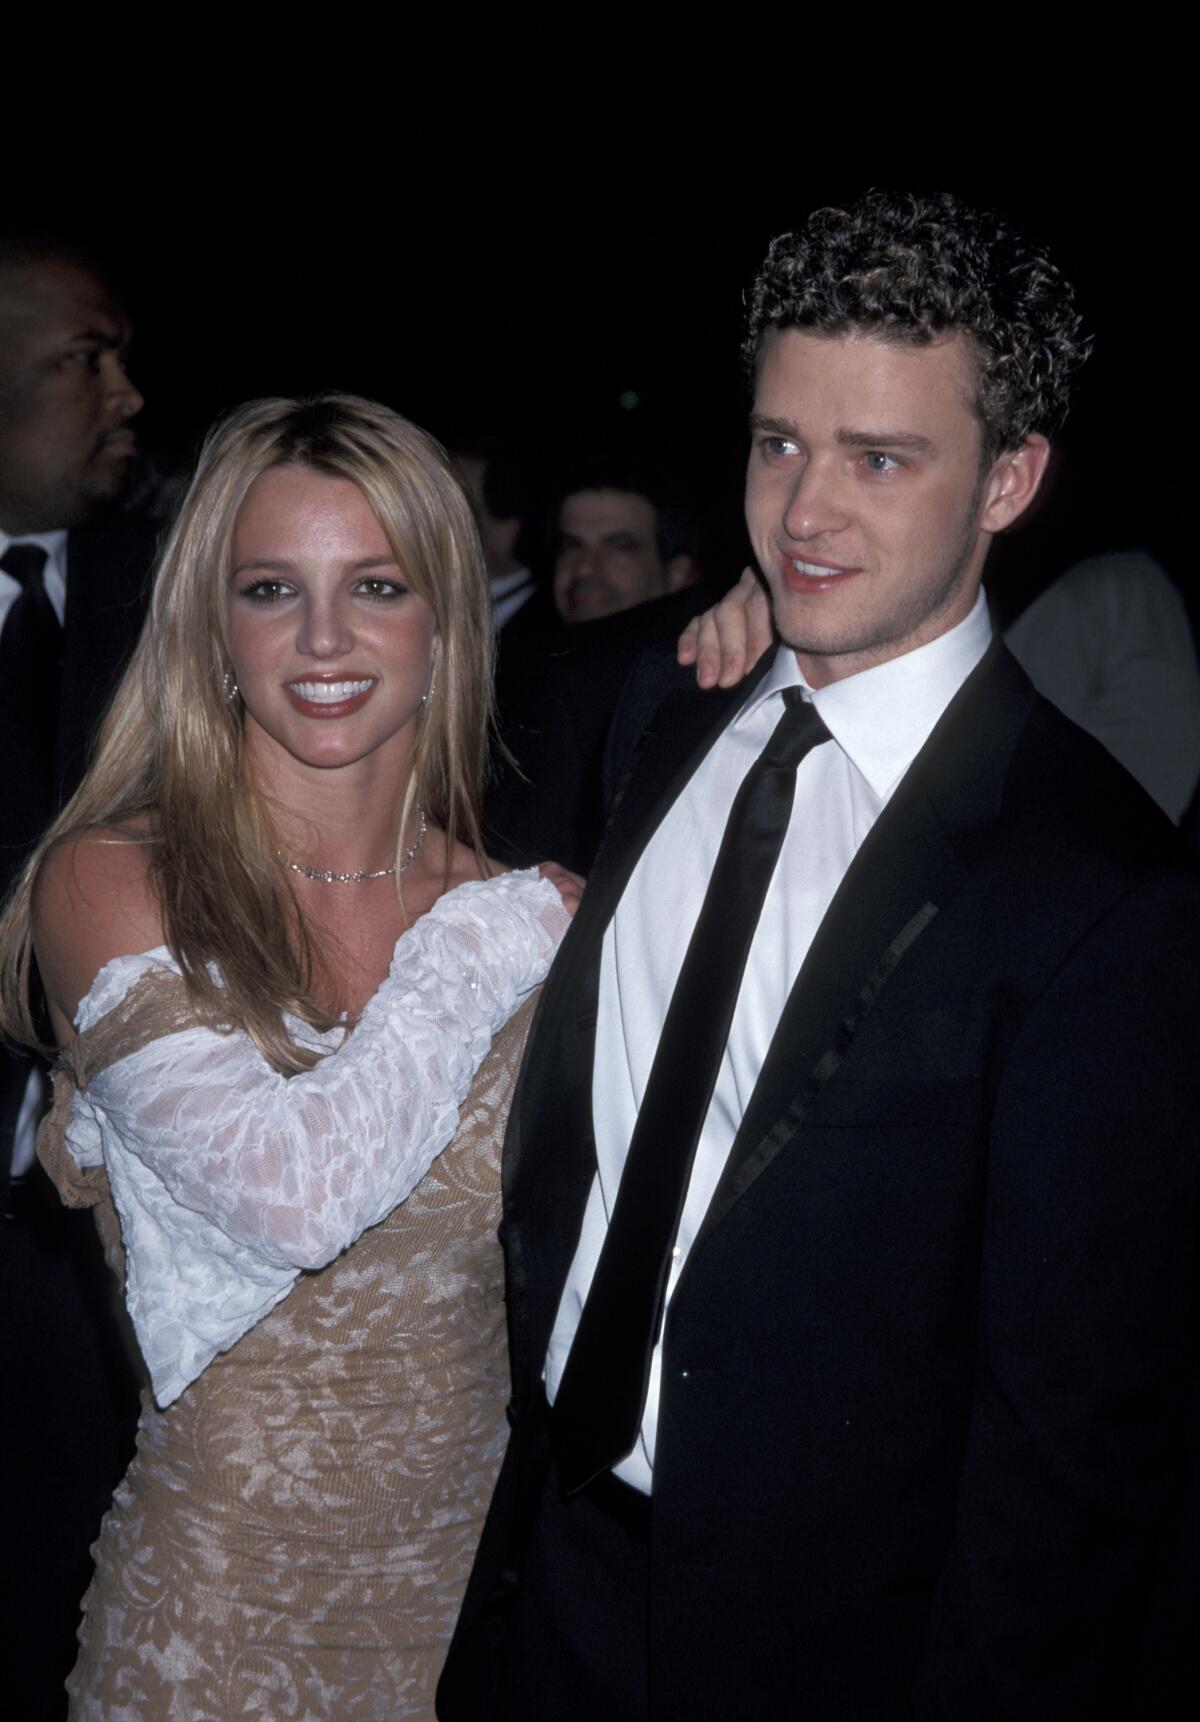 Britney Spears got abortion with Justin Timberlake, her new book says 